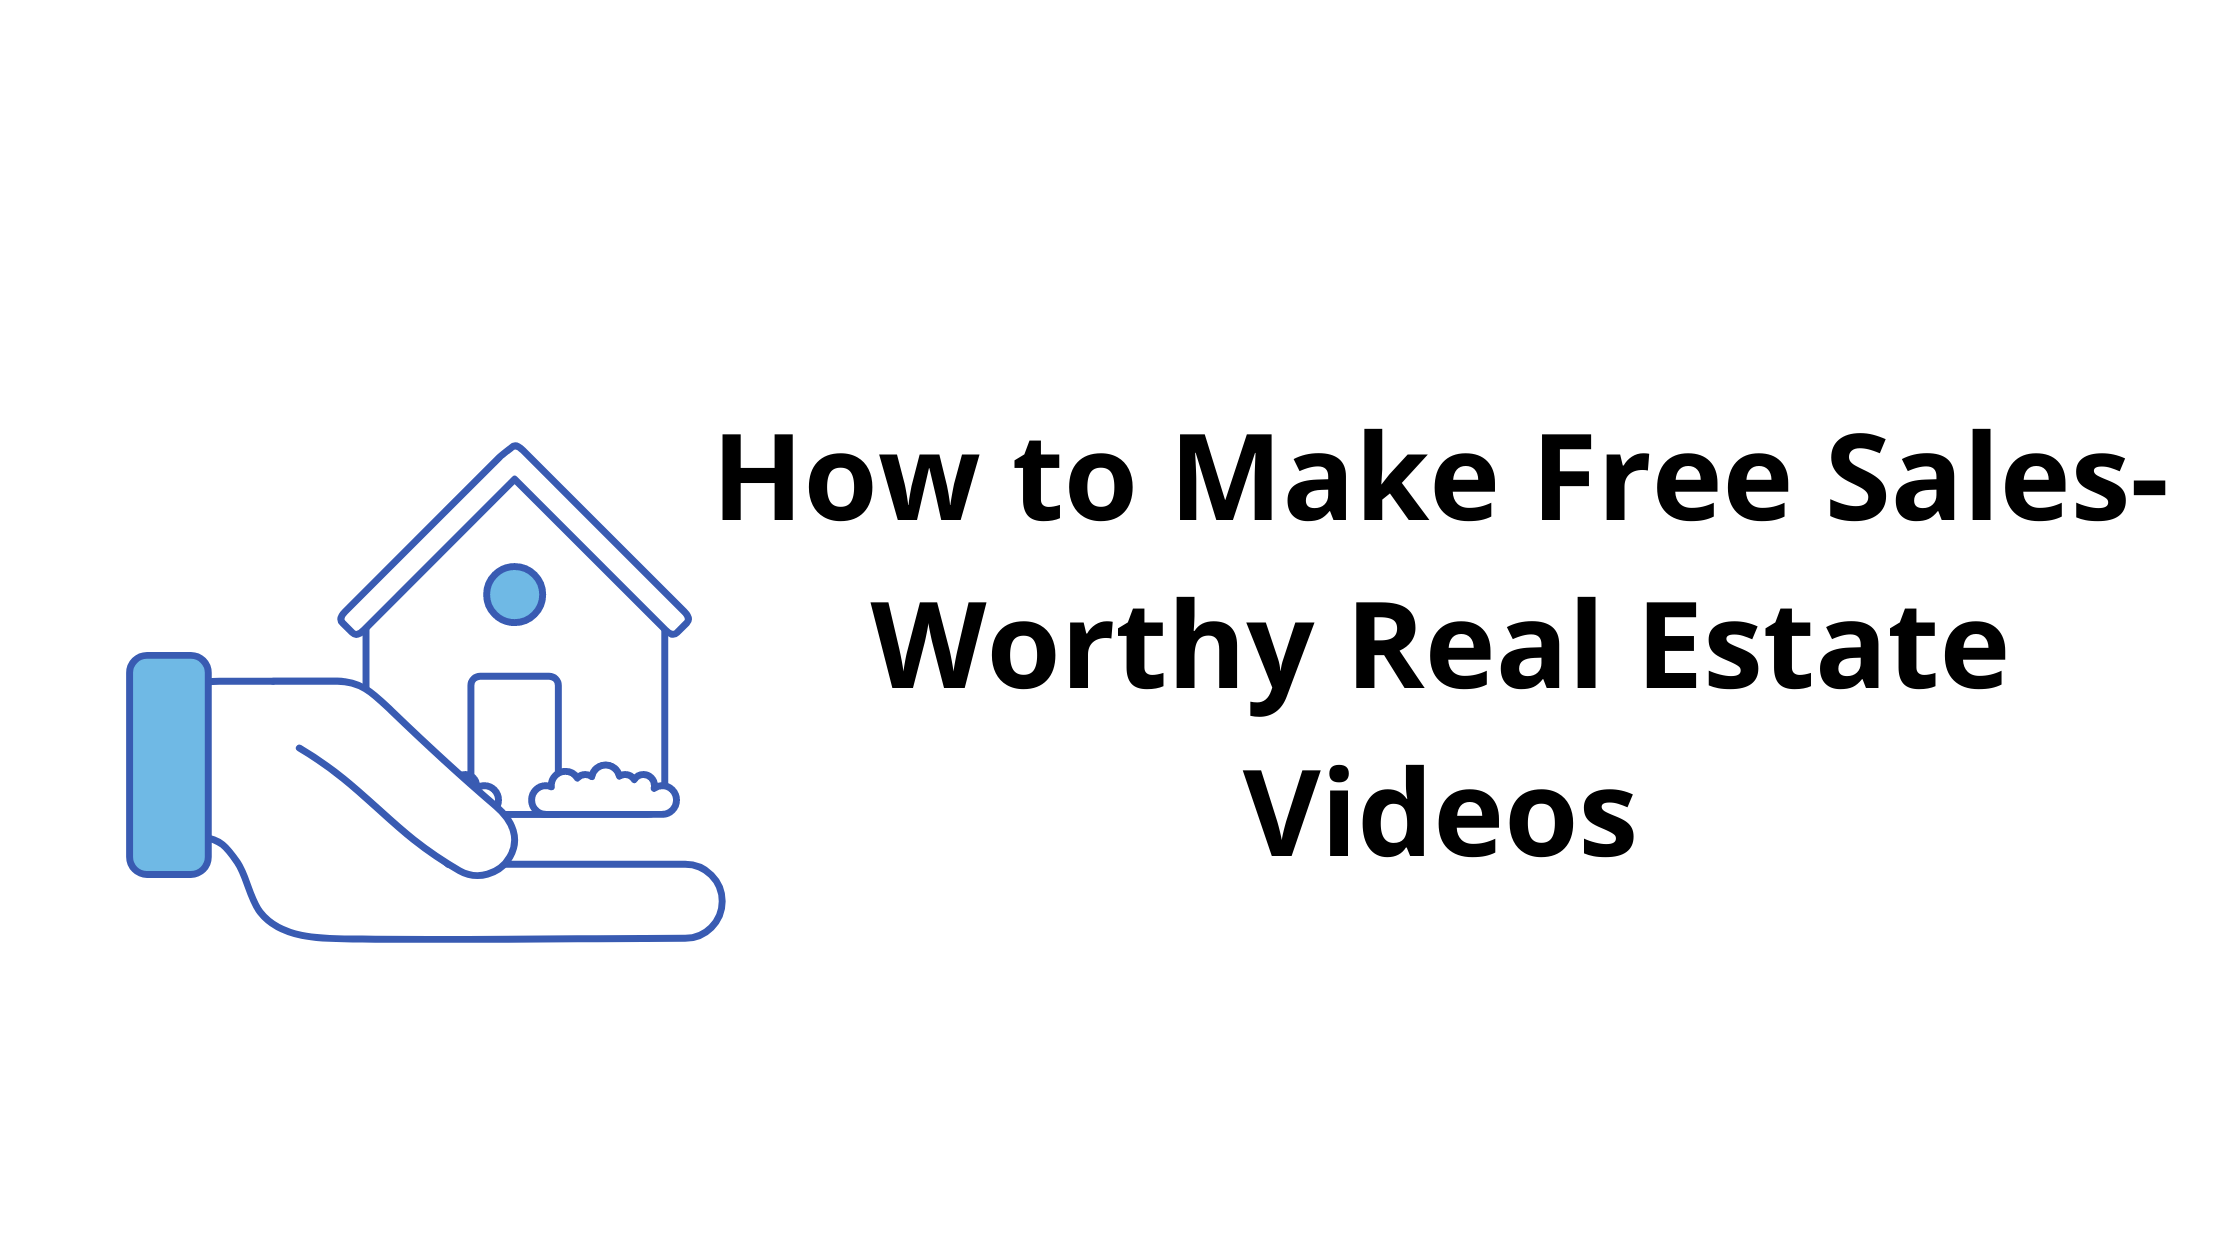 How to Make Free Sales-Worthy Real Estate Videos